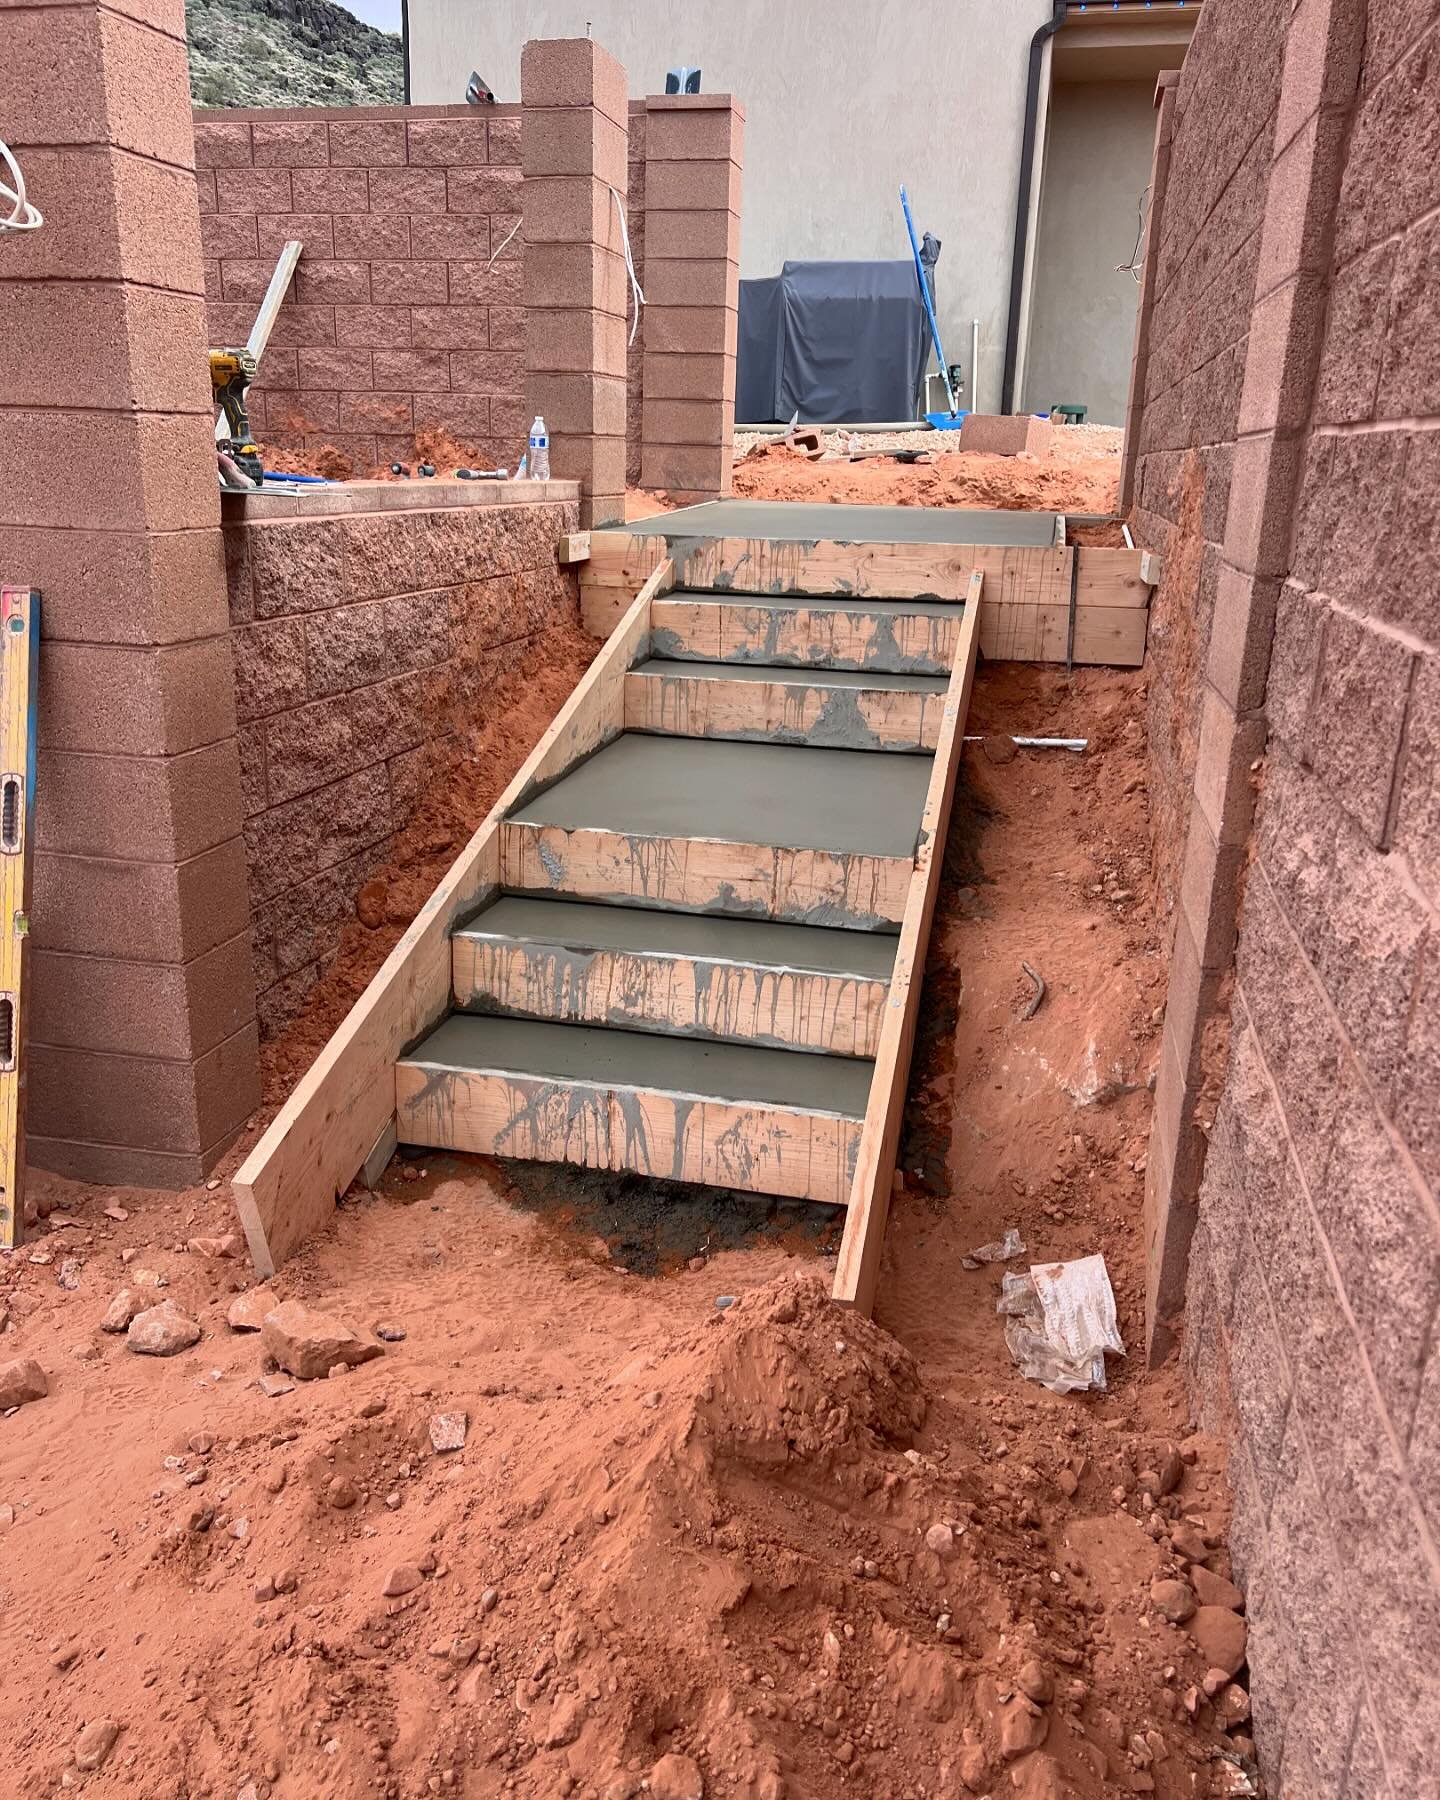 &ldquo;Another successful project completed! ✅ We&rsquo;ve built concrete steps with a 3-foot landing and installed block retaining walls for the spa, along with a concrete base to support it. 💪 #construction #concrete #project #success #landscaping